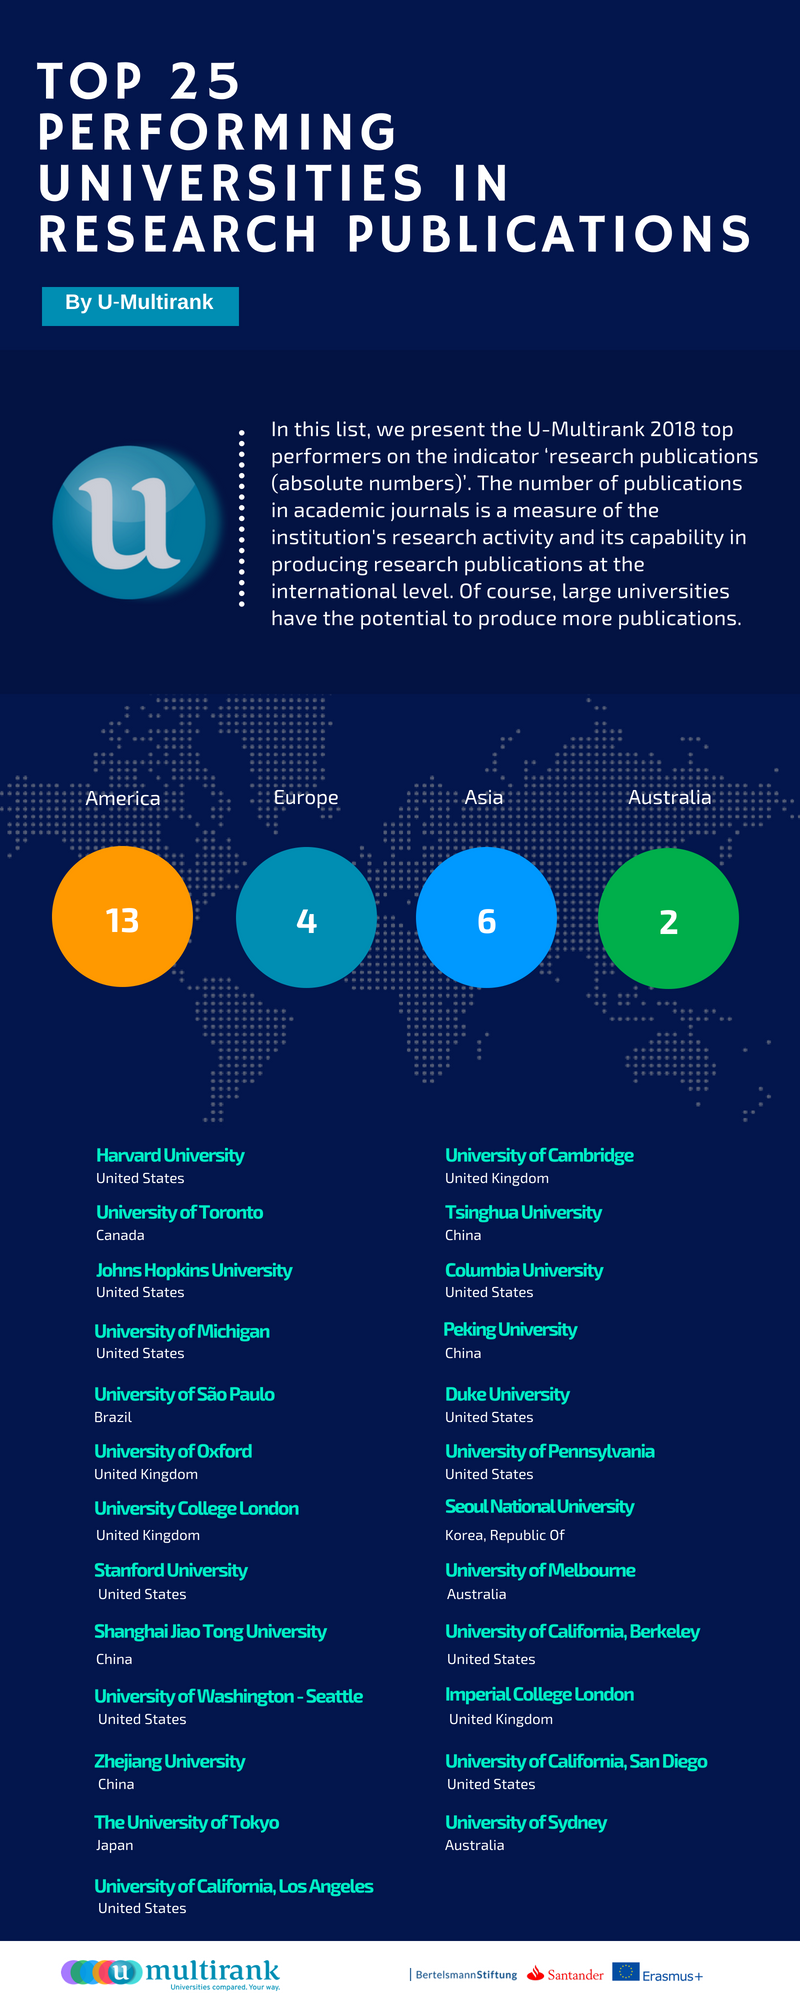 Top 25 universities in Research Publications